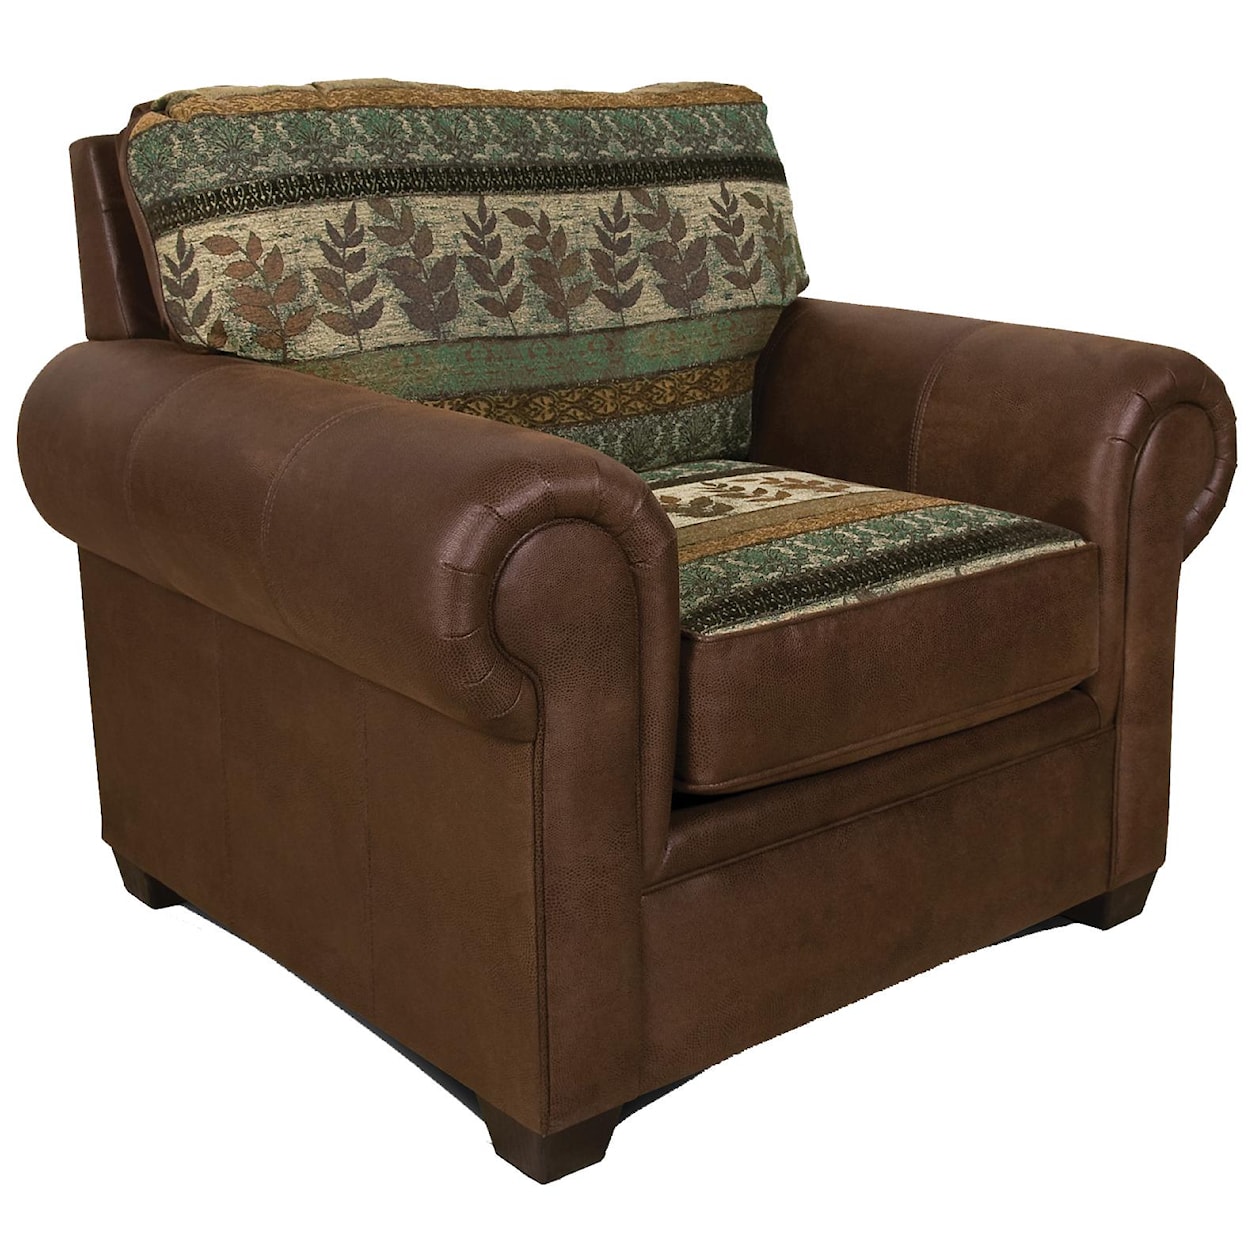 England 2260/N Series Upholstered Chair